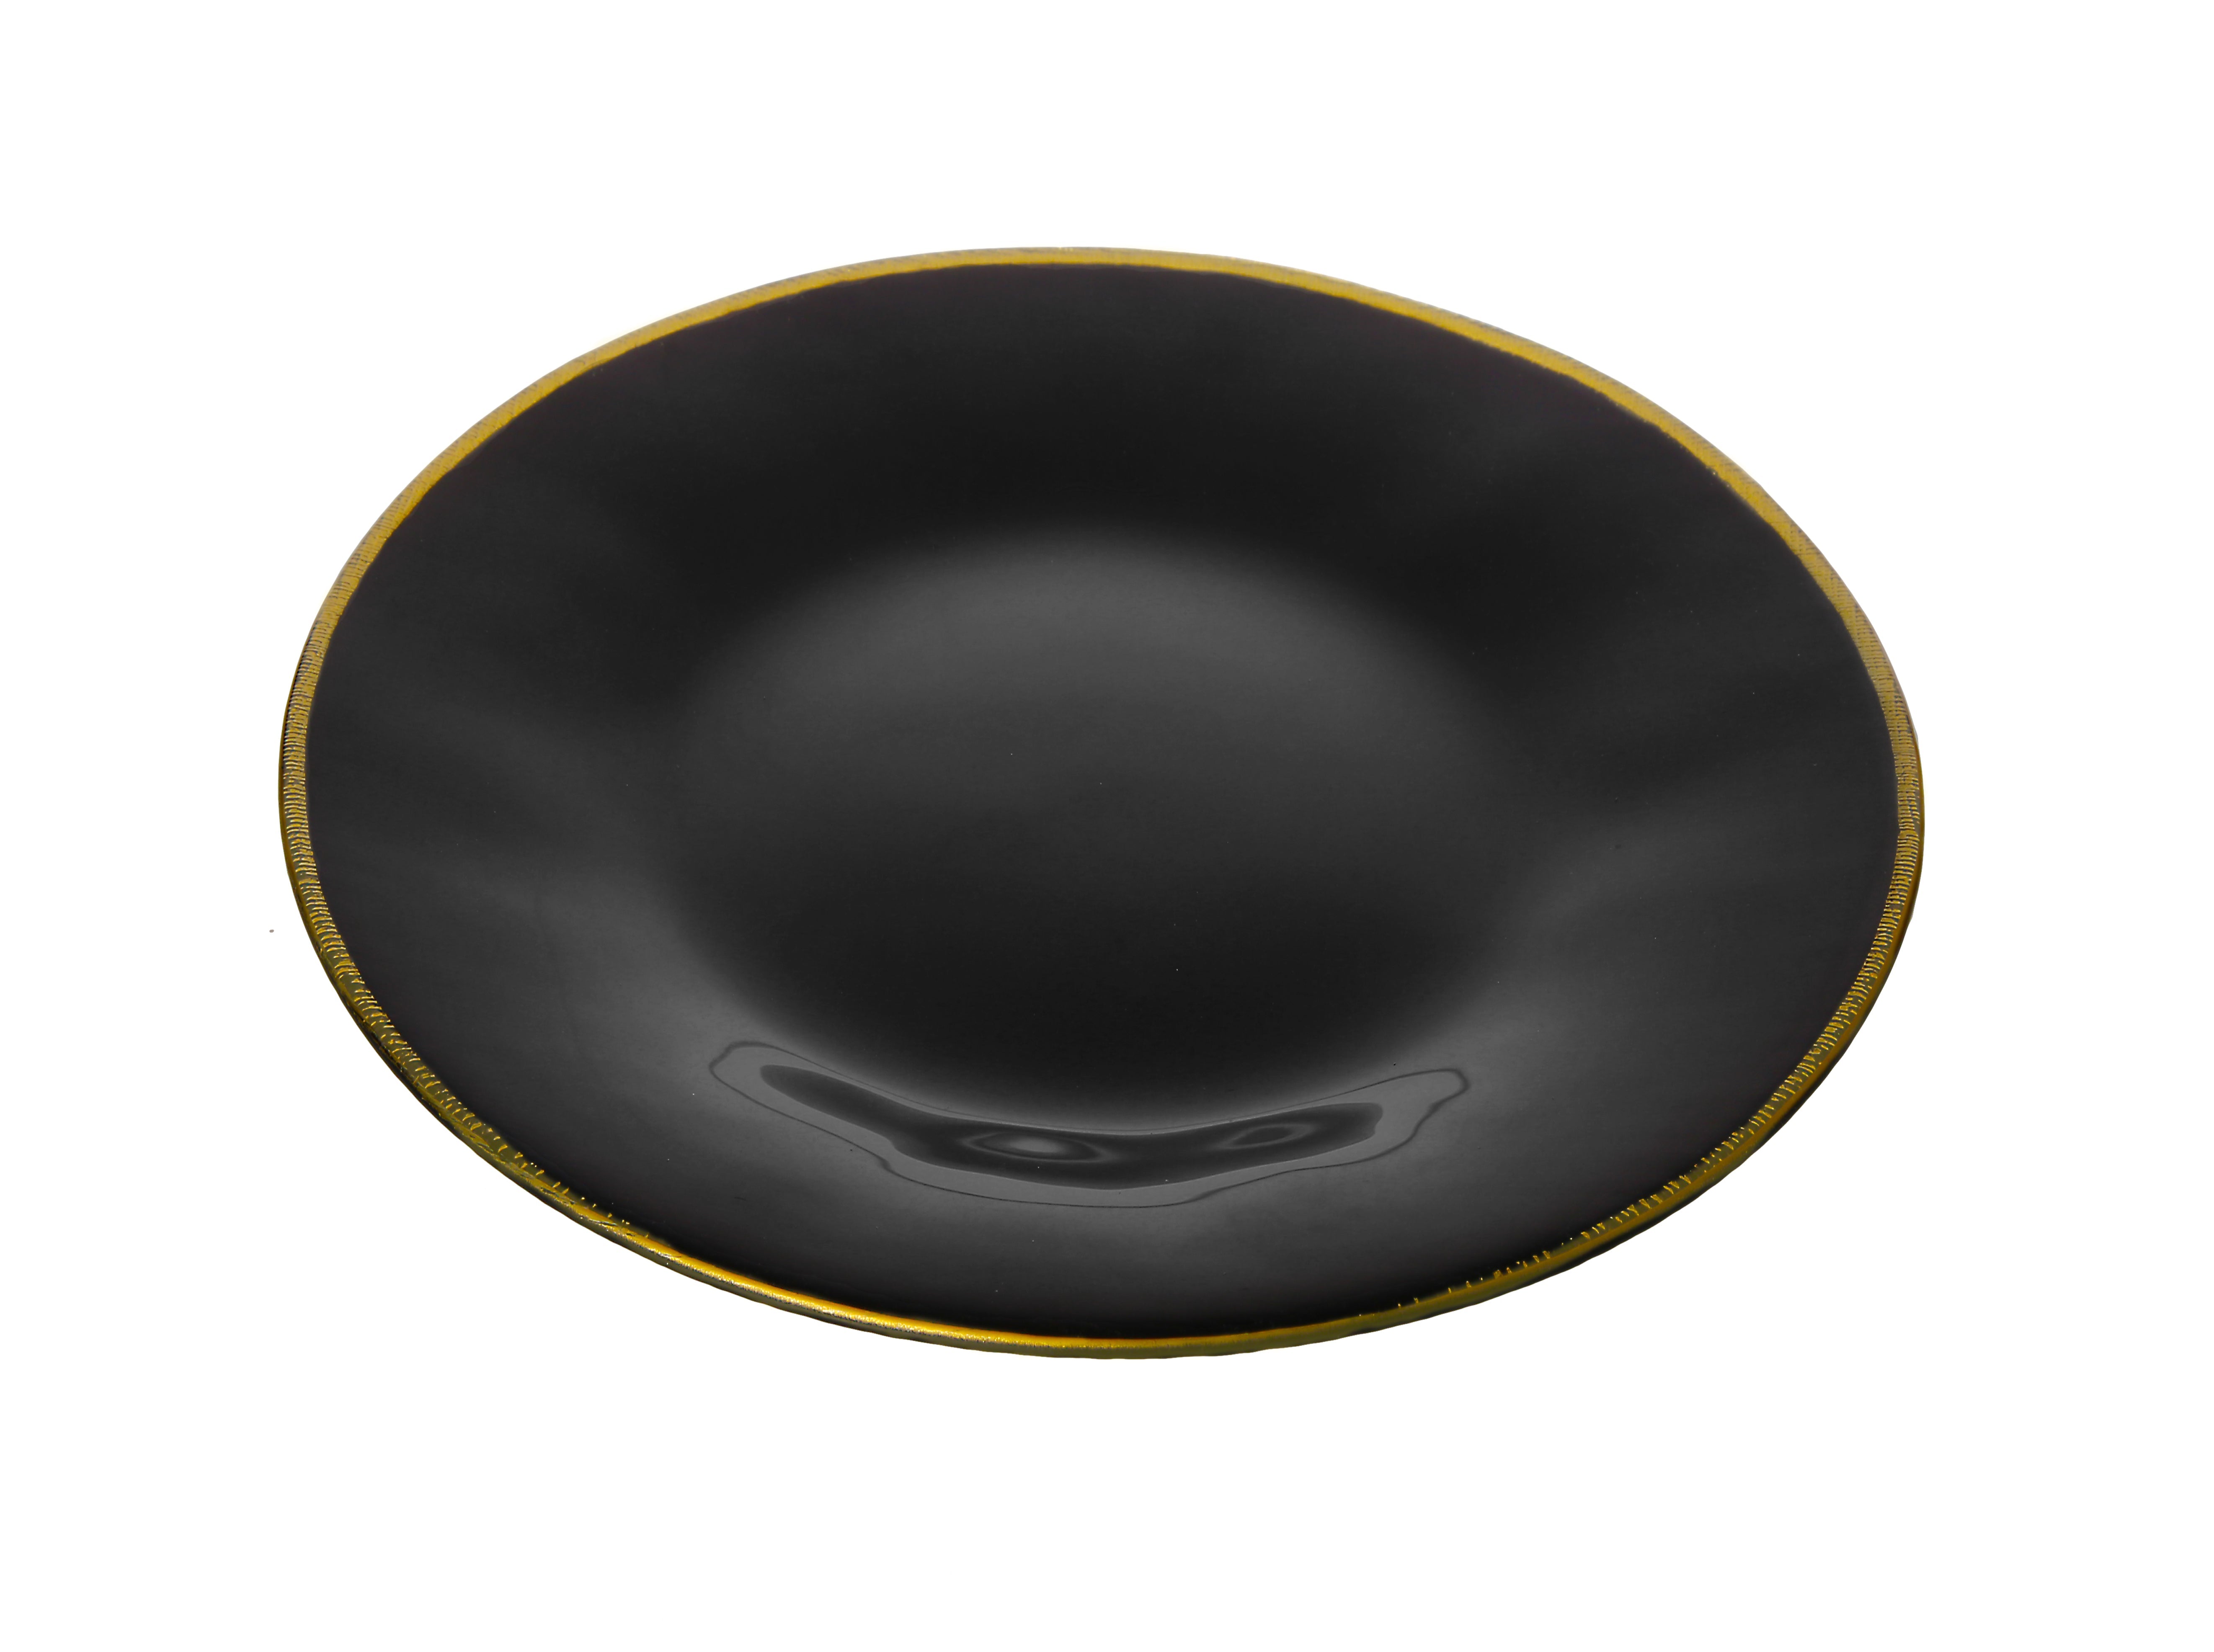 Shop Classic Touch Decor Set Of 4 Black Chargers With Gold Rim - 13"d